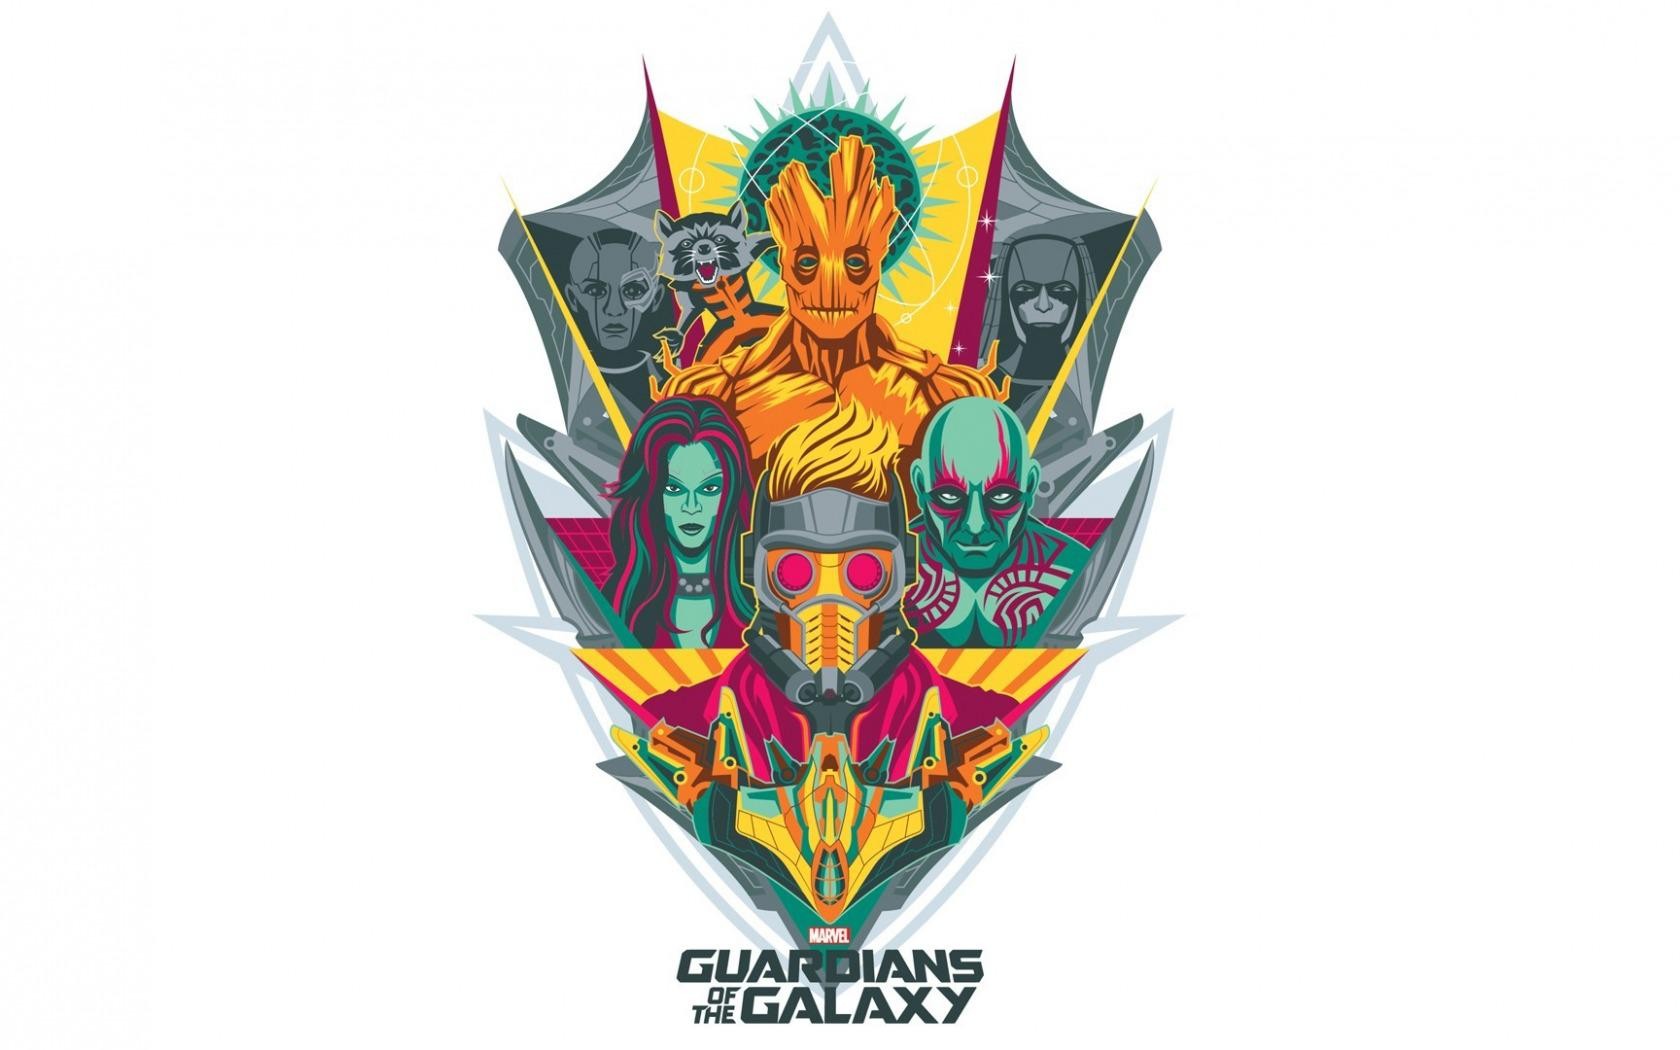 General 1680x1050 Guardians of the Galaxy Star-Lord Gamora  Rocket Raccoon Groot Drax the Destroyer simple background artwork movies Marvel Cinematic Universe white background